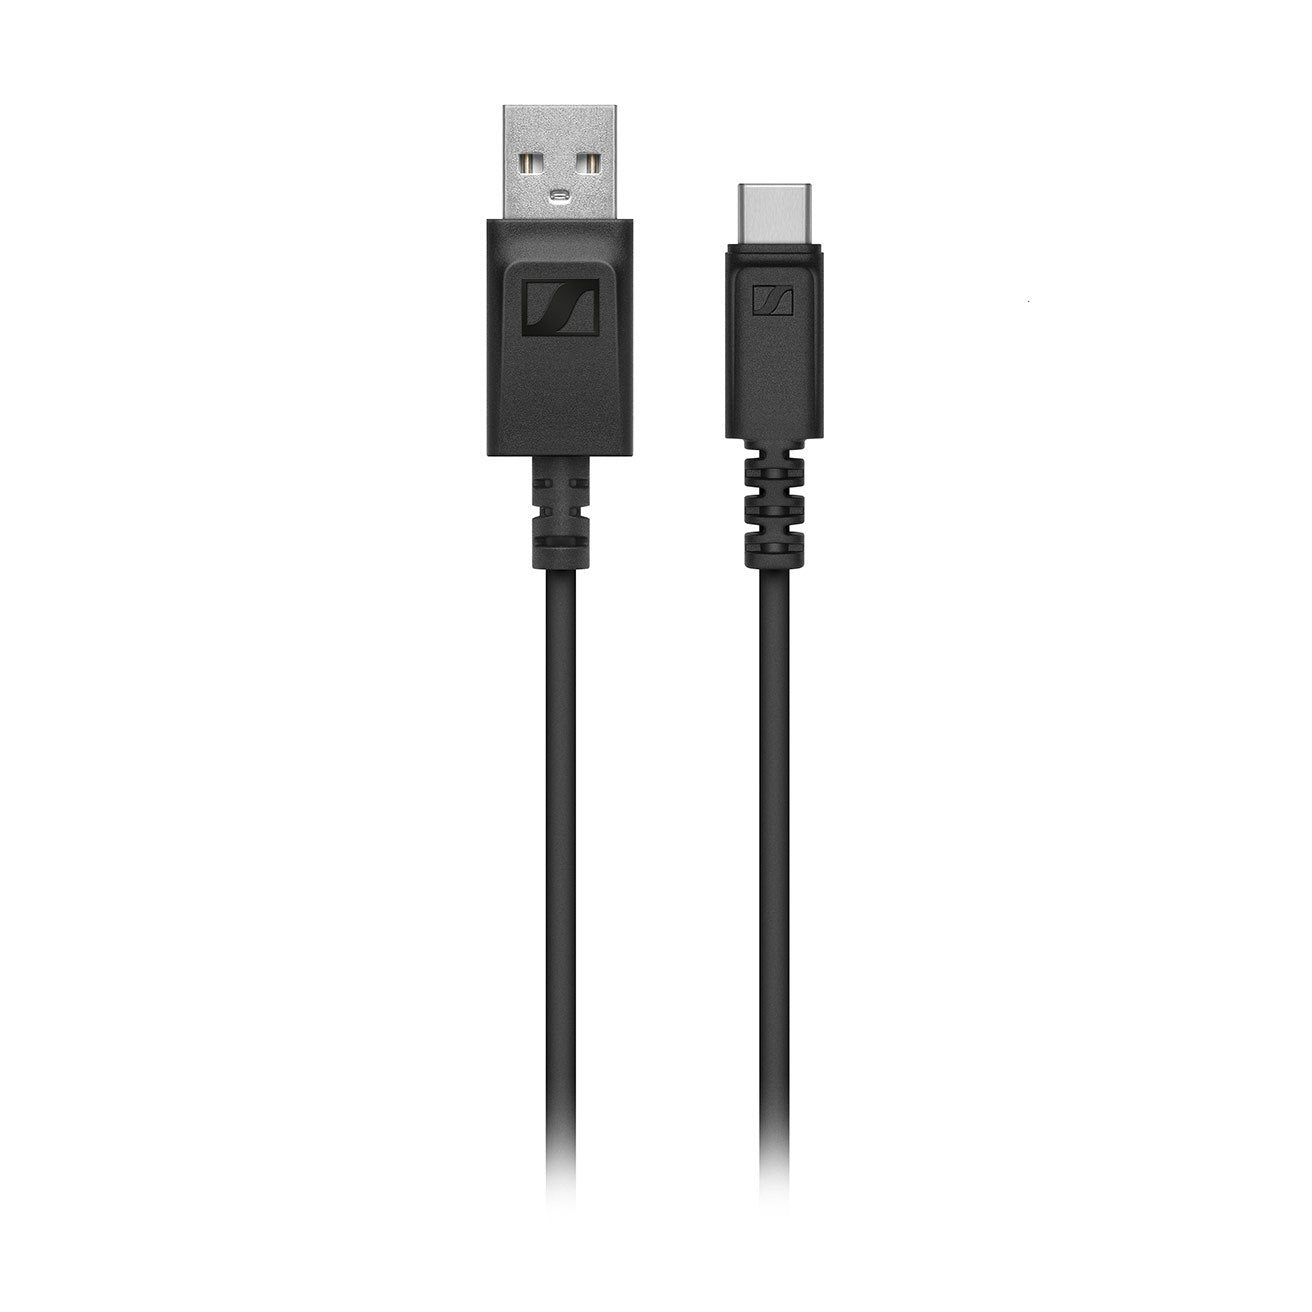 Sennheiser XS Wireless Digital - XSW-D Portable Eng Set, USB-A to USB-C charging cable